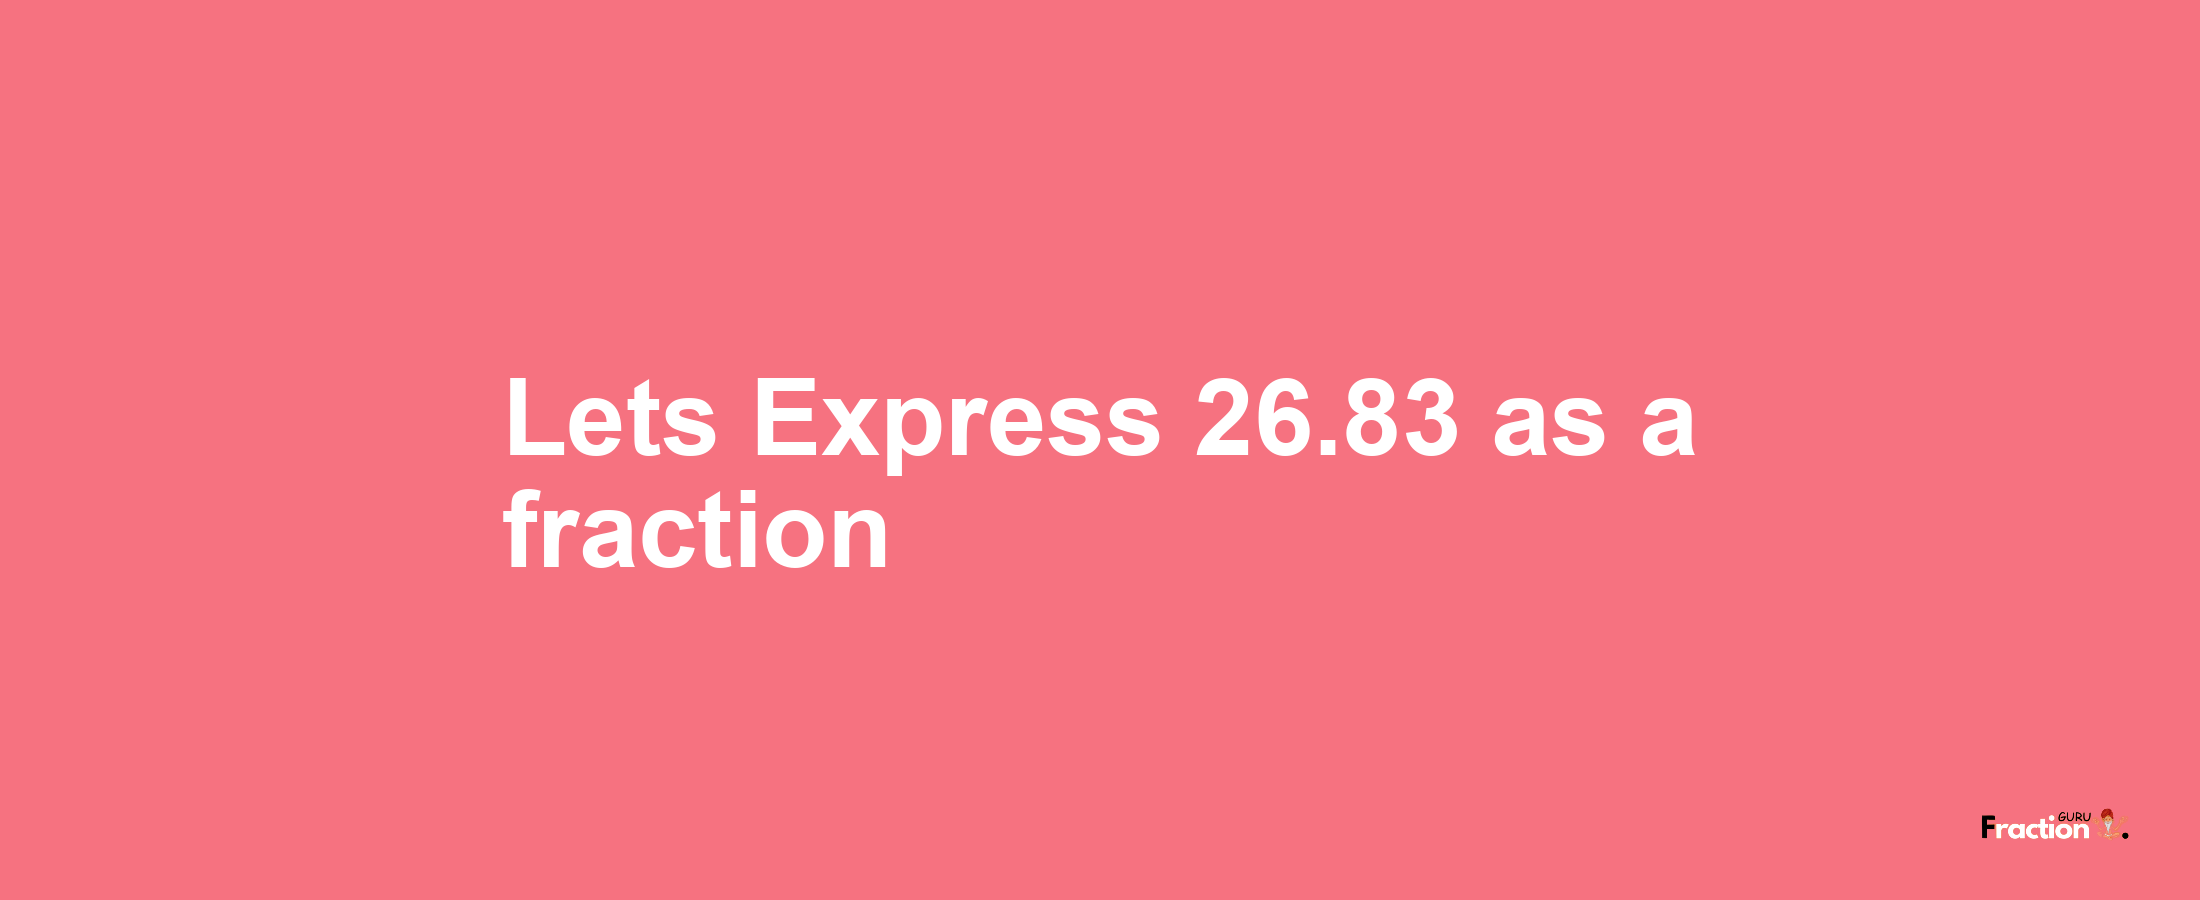 Lets Express 26.83 as afraction